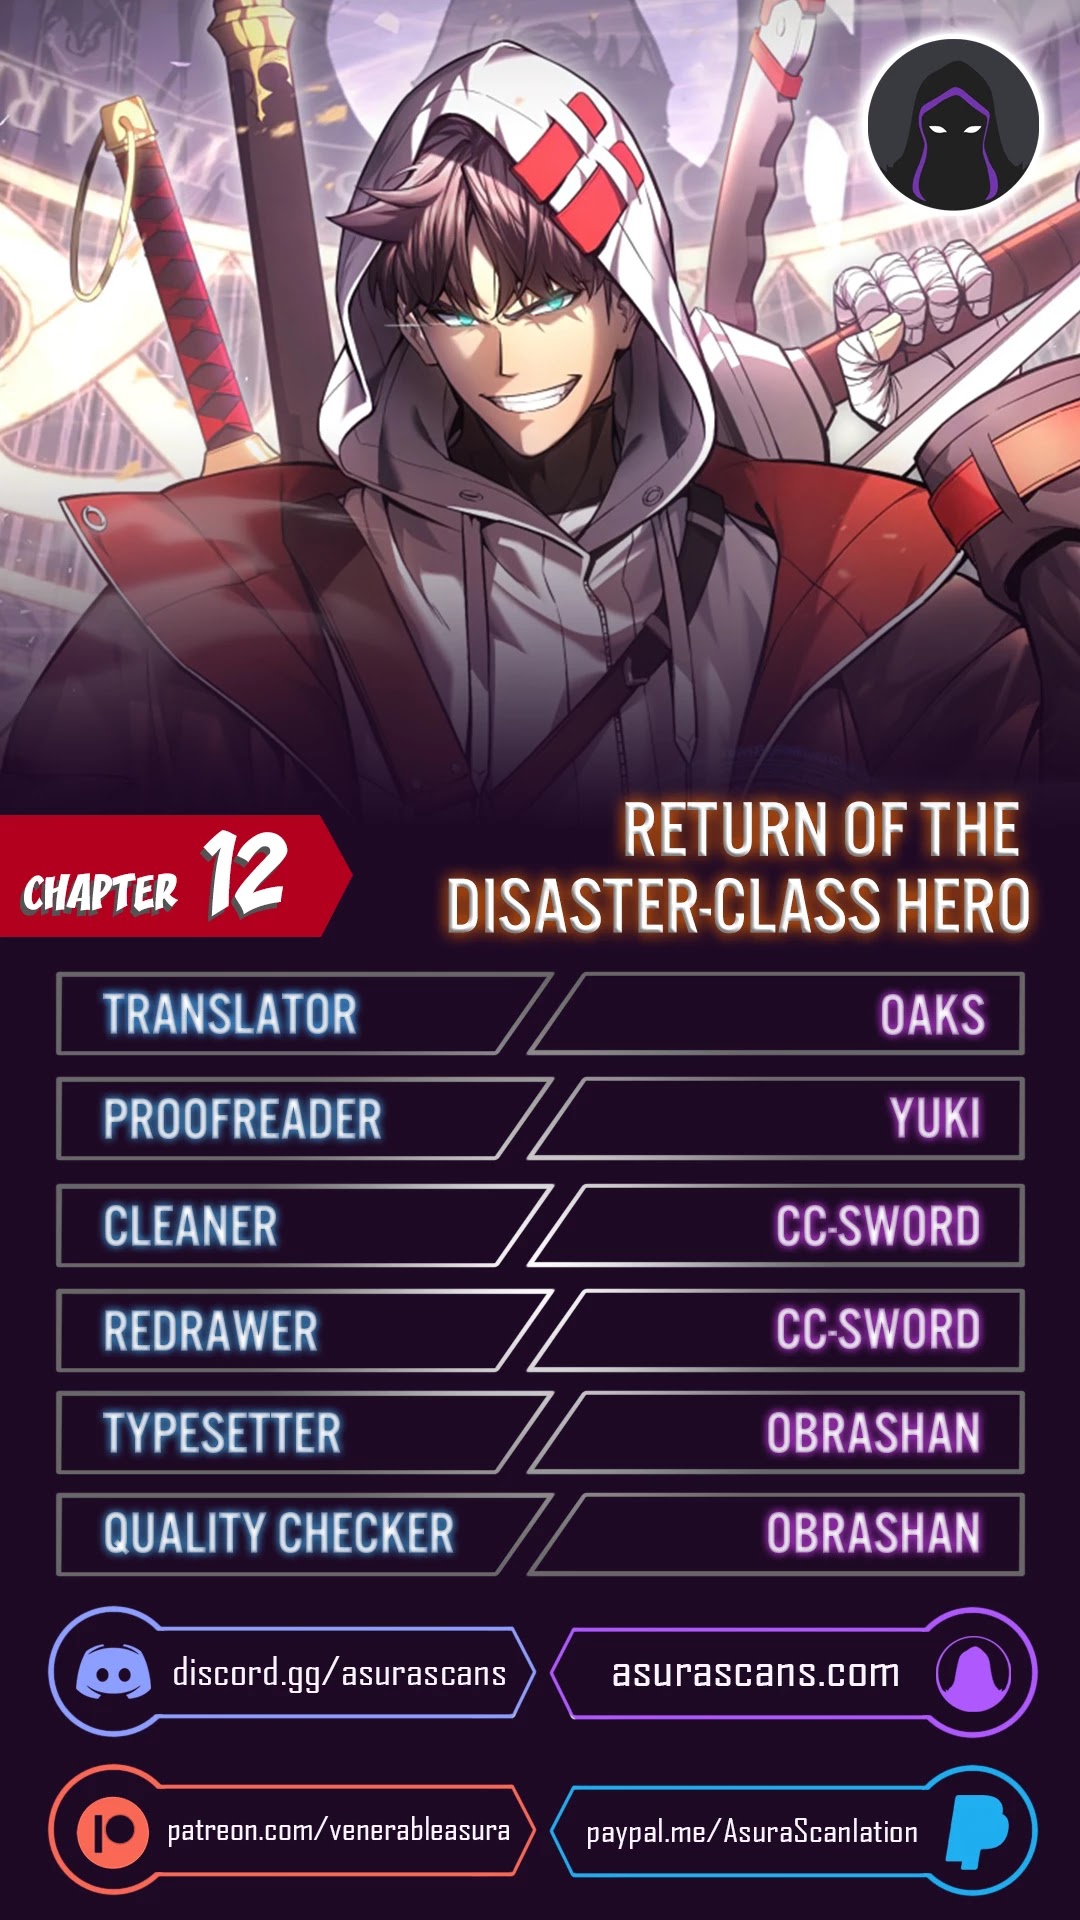 The Return Of The Disaster-Class Hero Chapter 12